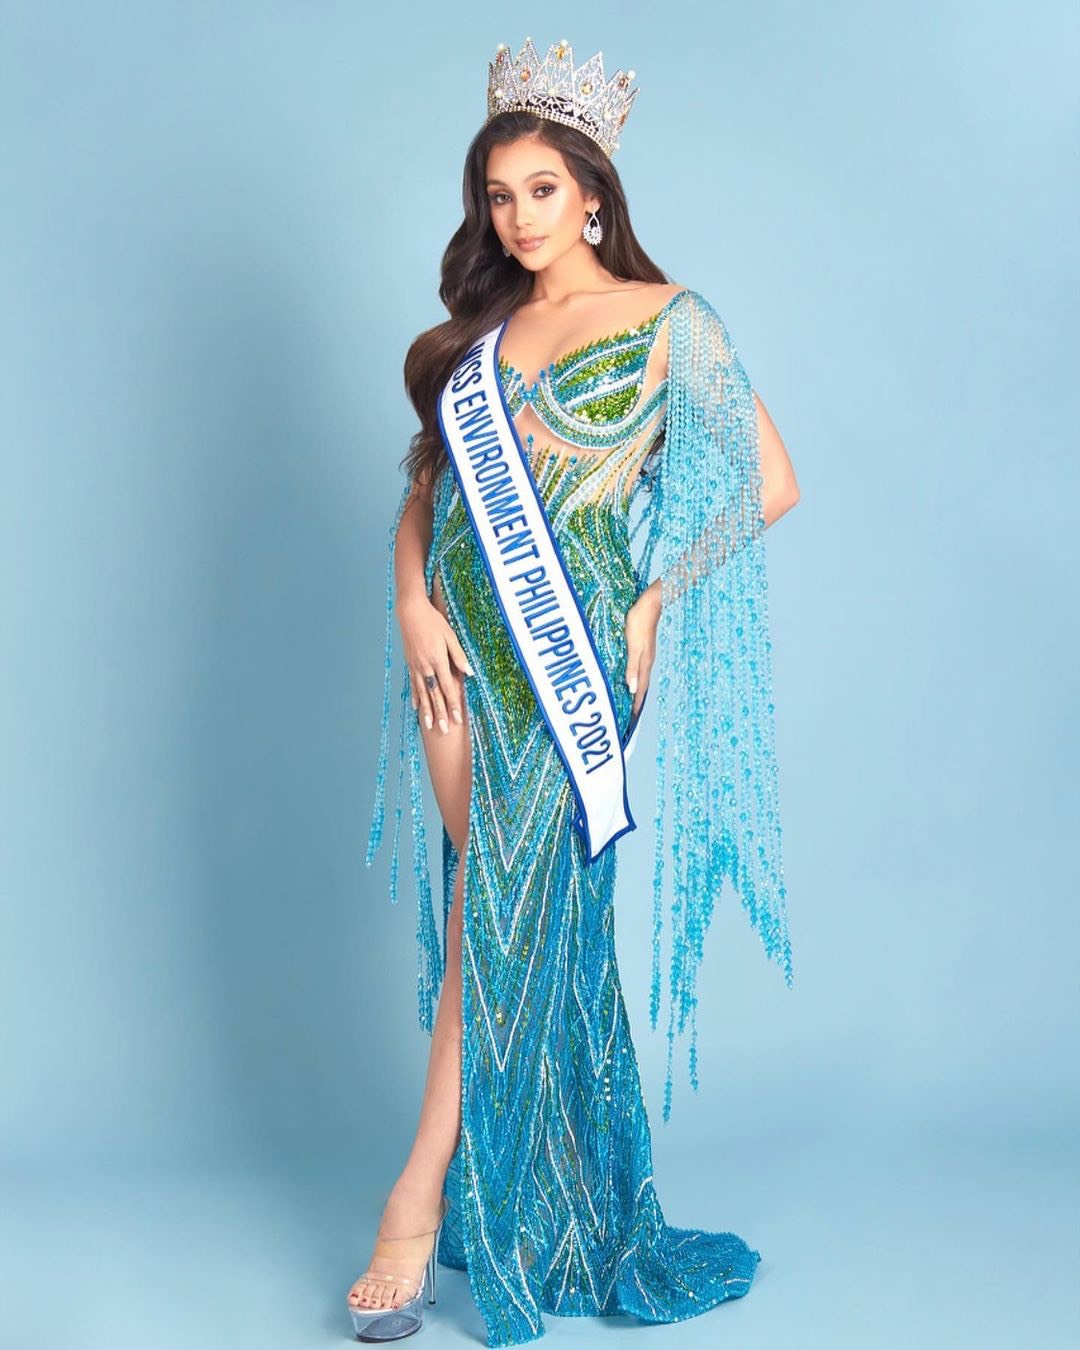 Michelle Arceo Miss Ecosystem at Miss Environment International